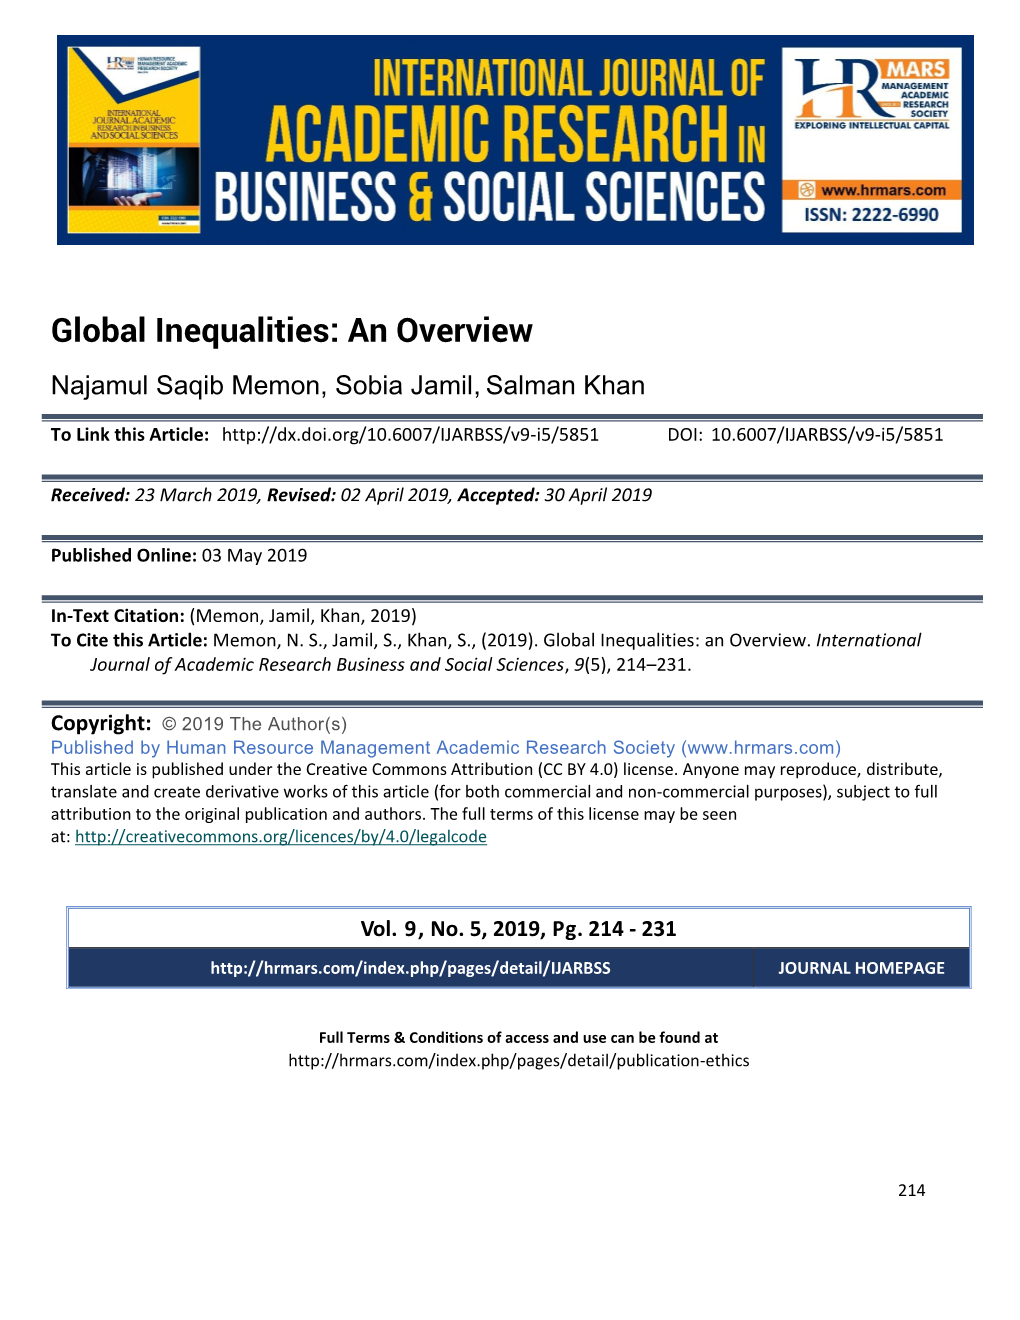 Global Inequalities: an Overview